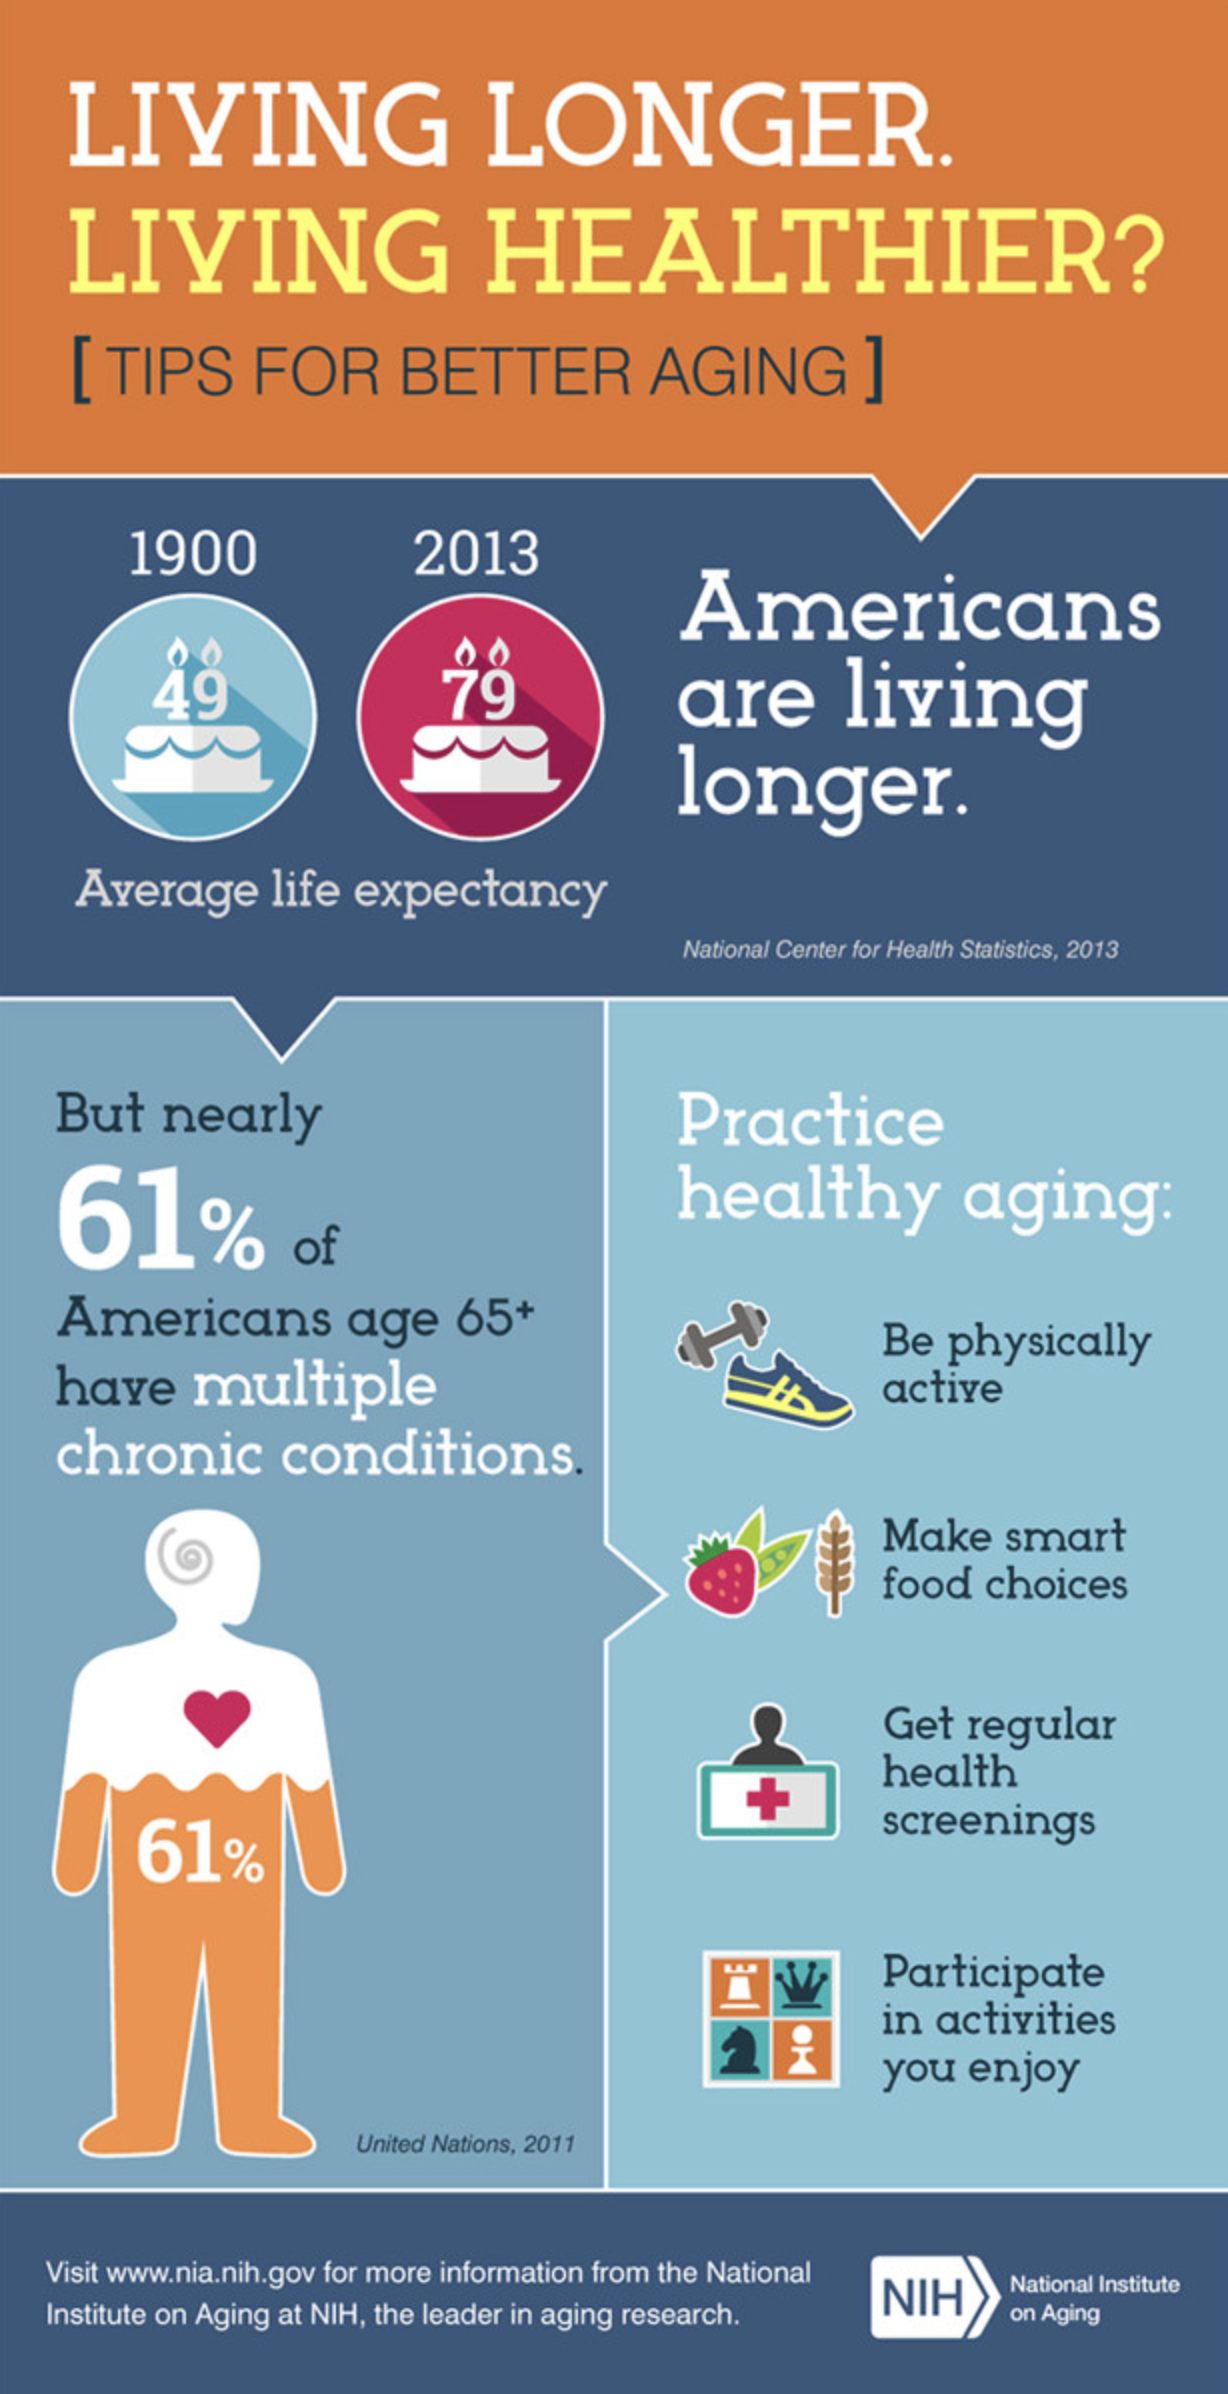 Diet and Exercise: Choices Today for a Healthier Tomorrow